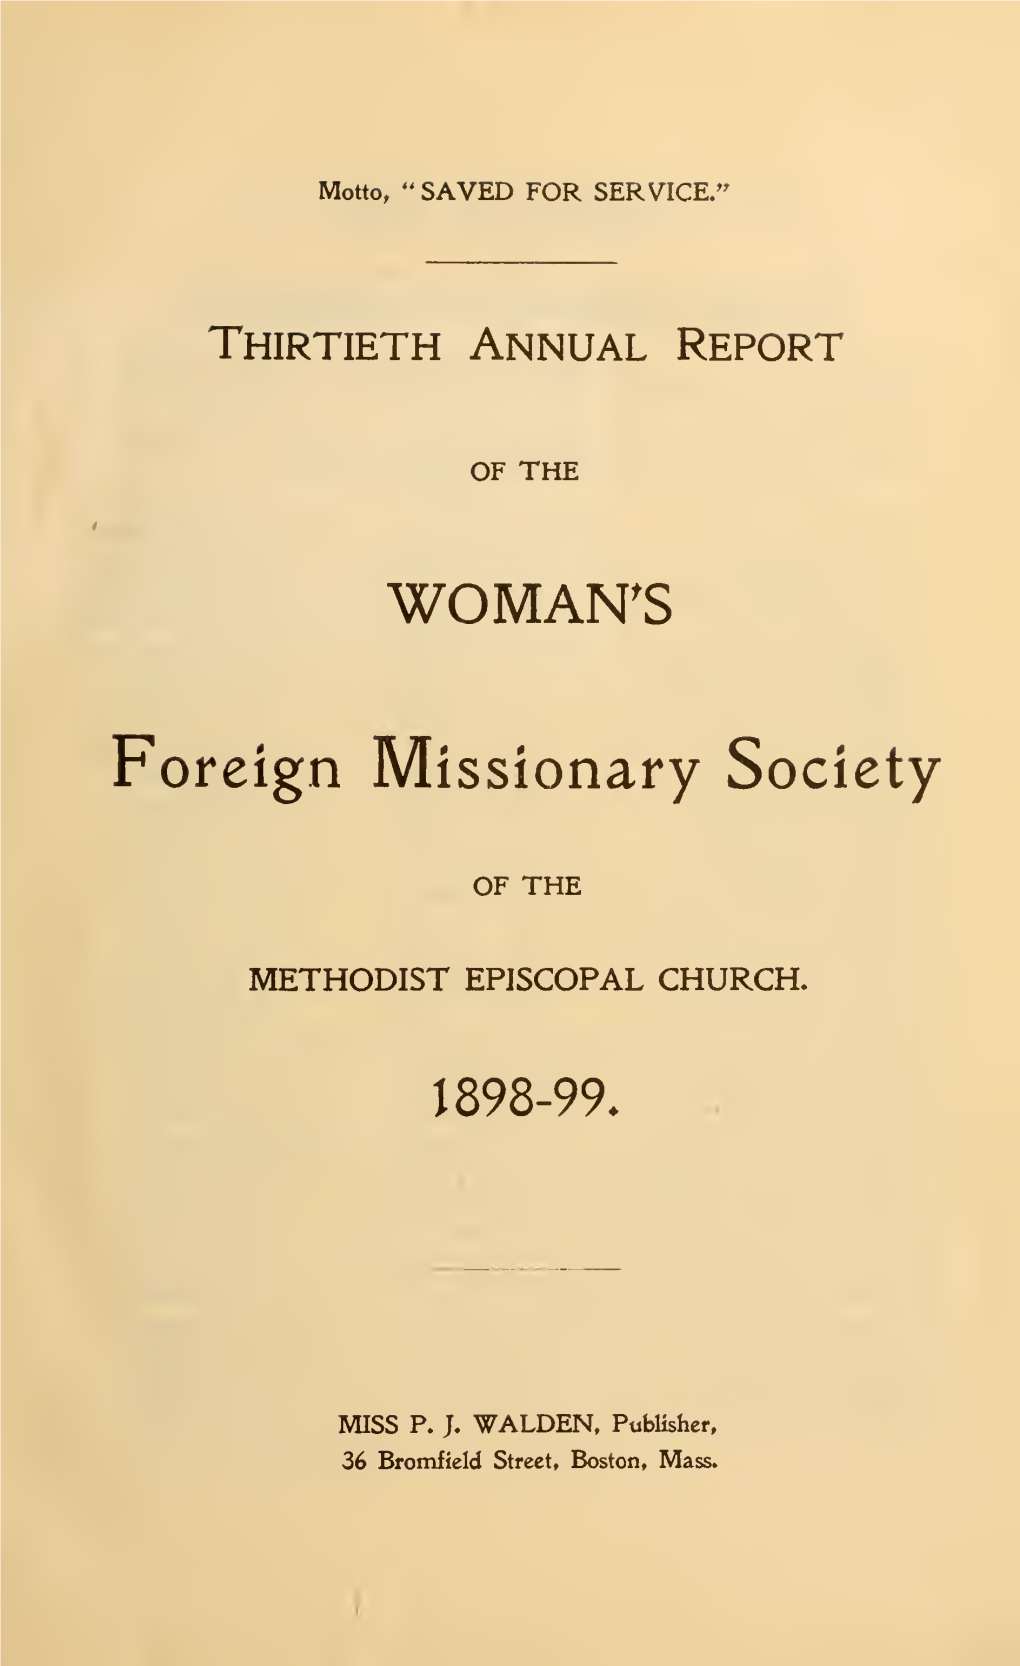 Thirtieth Annual Report of the Woman's Foreign Missionary